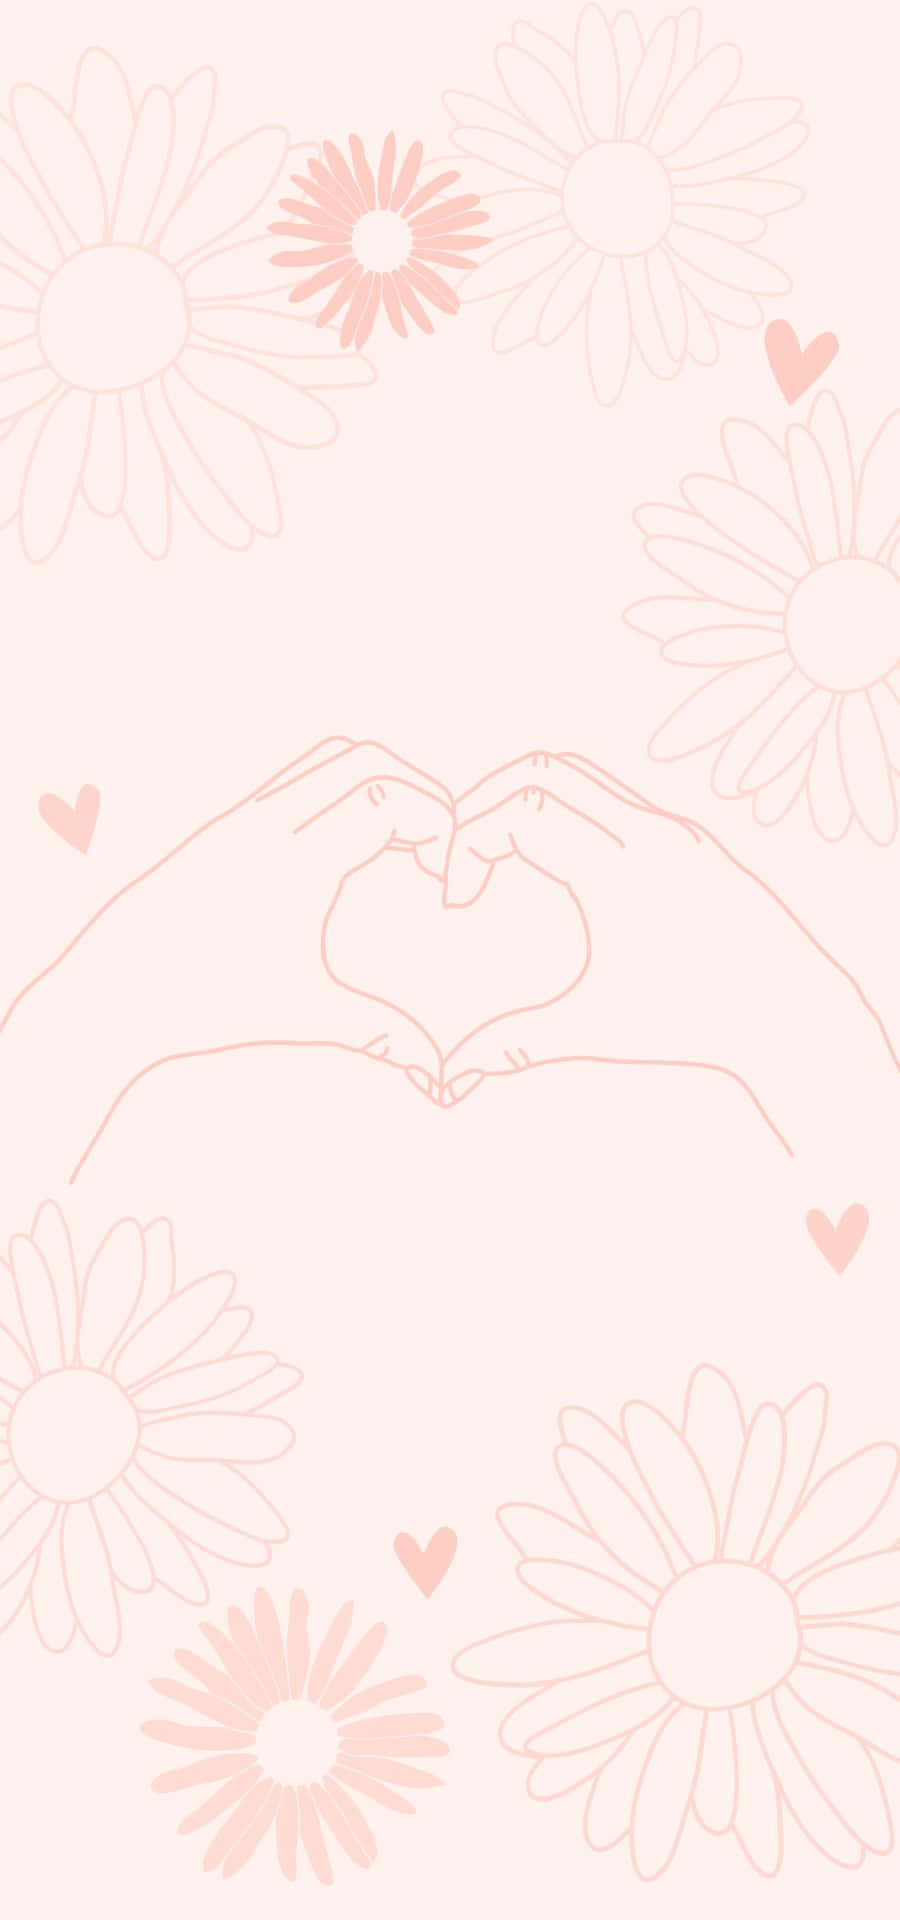 A Pink Background With Hands Making A Heart Shape